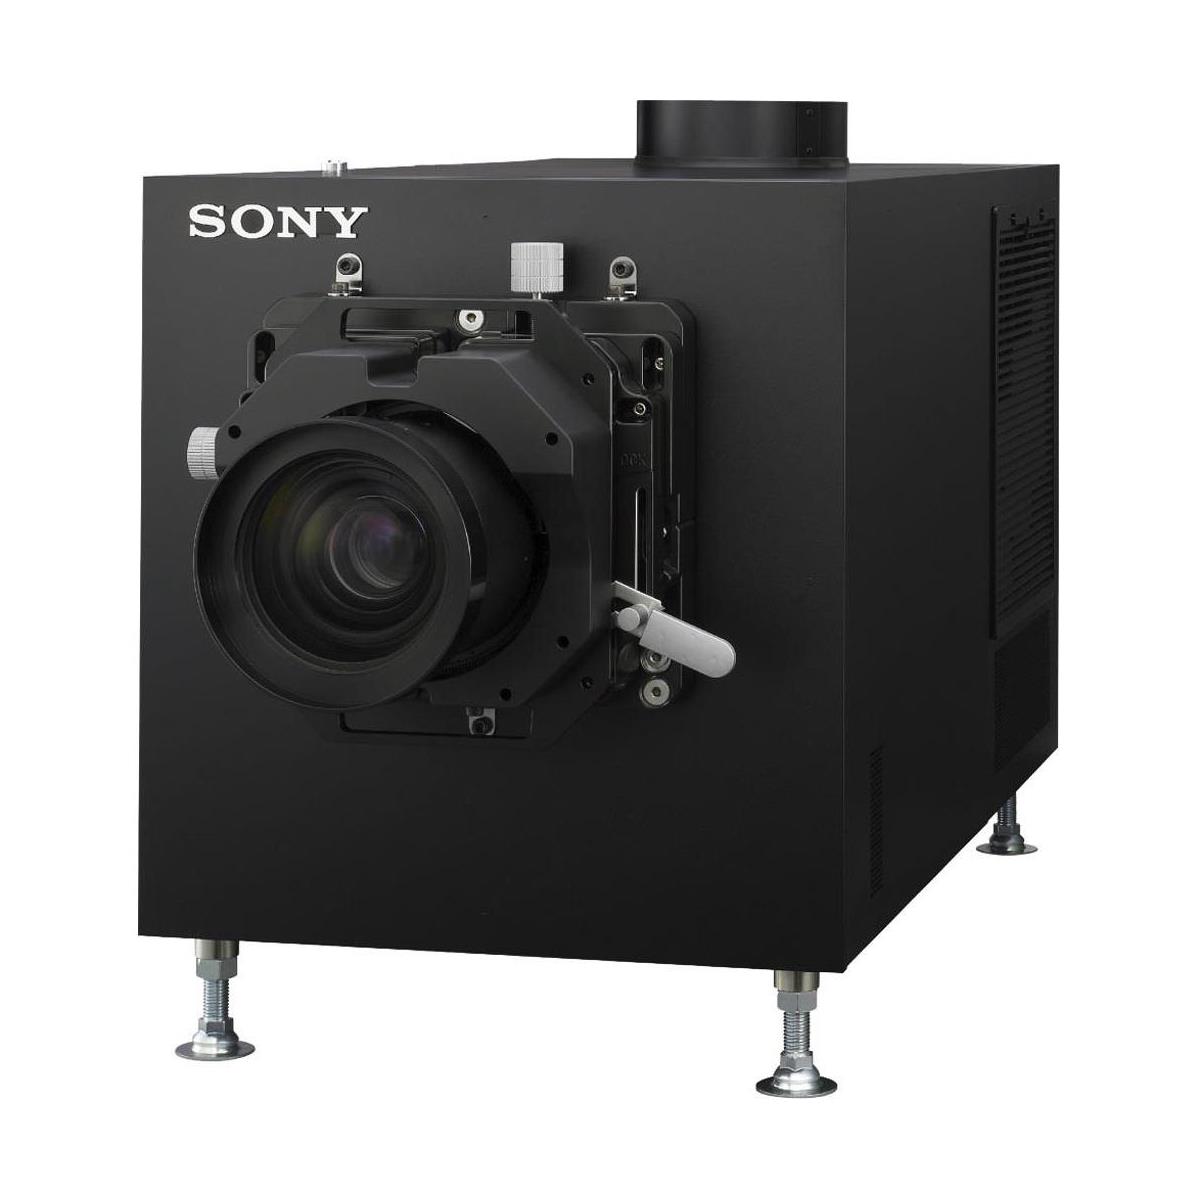 Image of Sony SRX-T6154K Digital Projector (Lens not included)